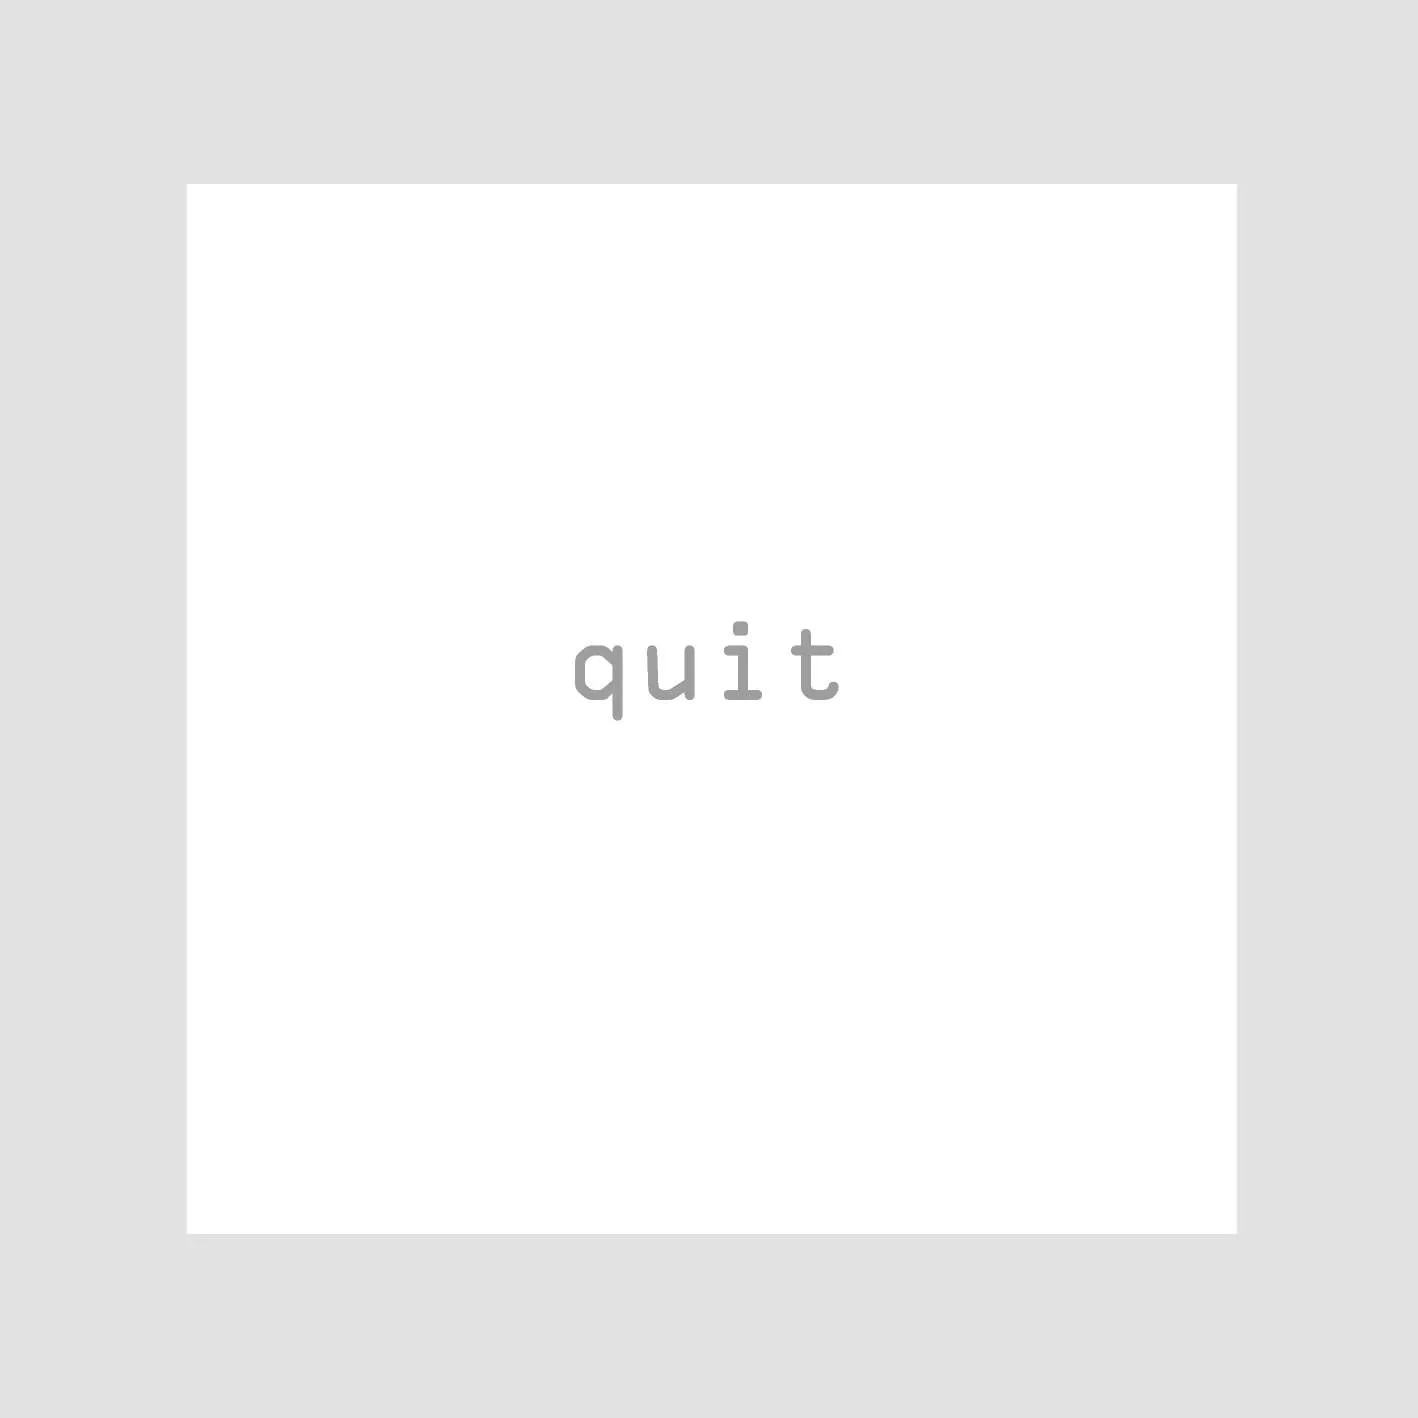 Album cover for “Quit” by C-Doc